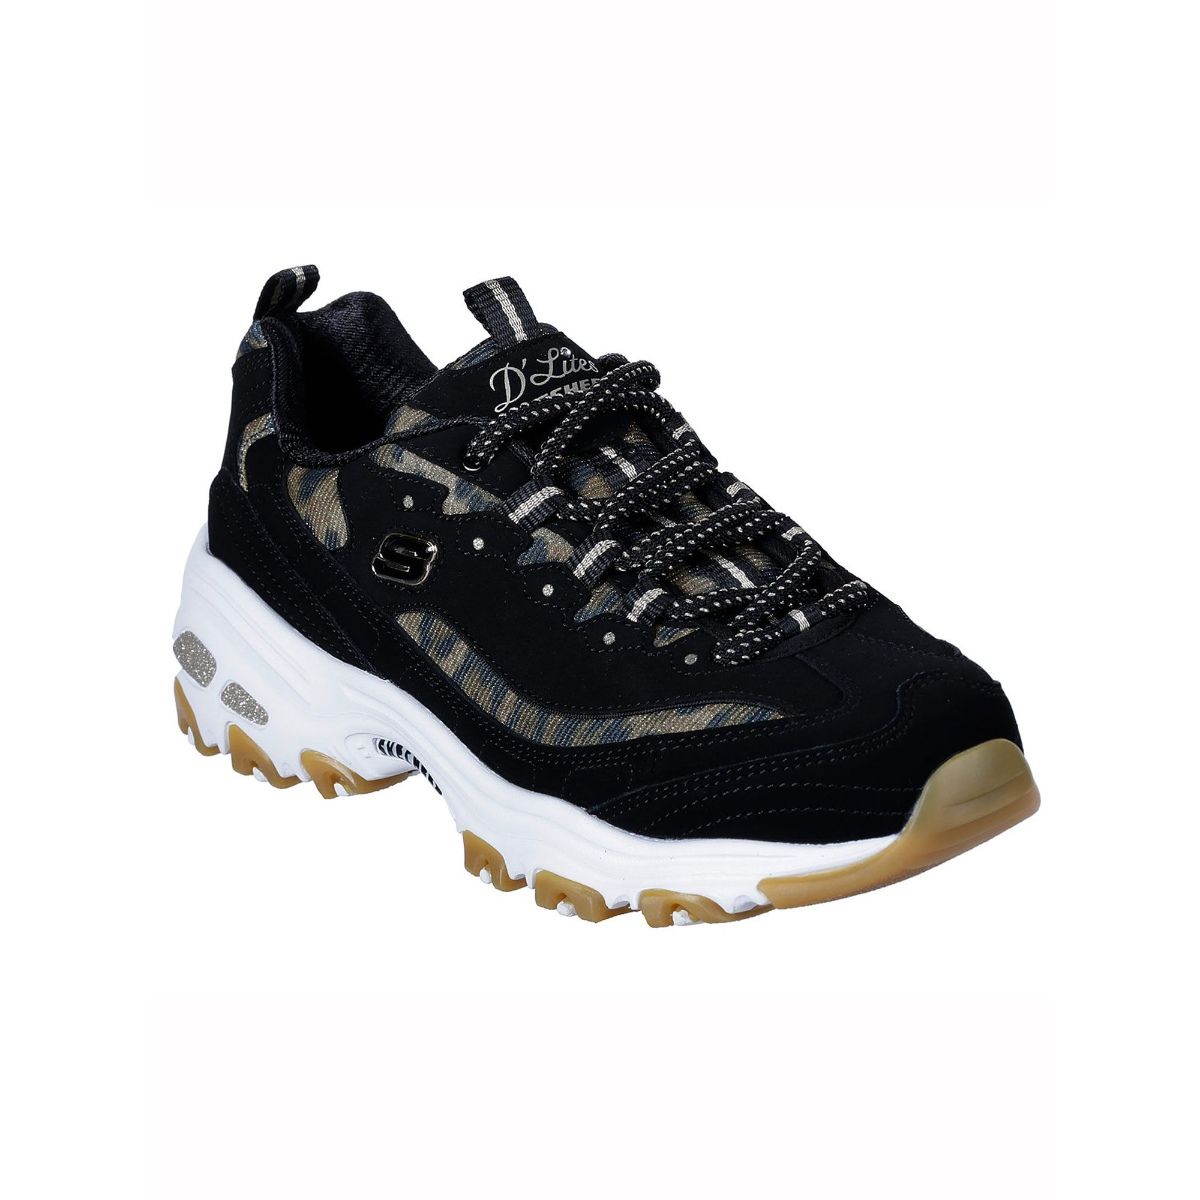 SKECHERS D'LITES QUICK LEOPARD Black Casual shoes: Buy SKECHERS D'LITES QUICK LEOPARD Black Casual shoes at Best Price in India | Nykaa